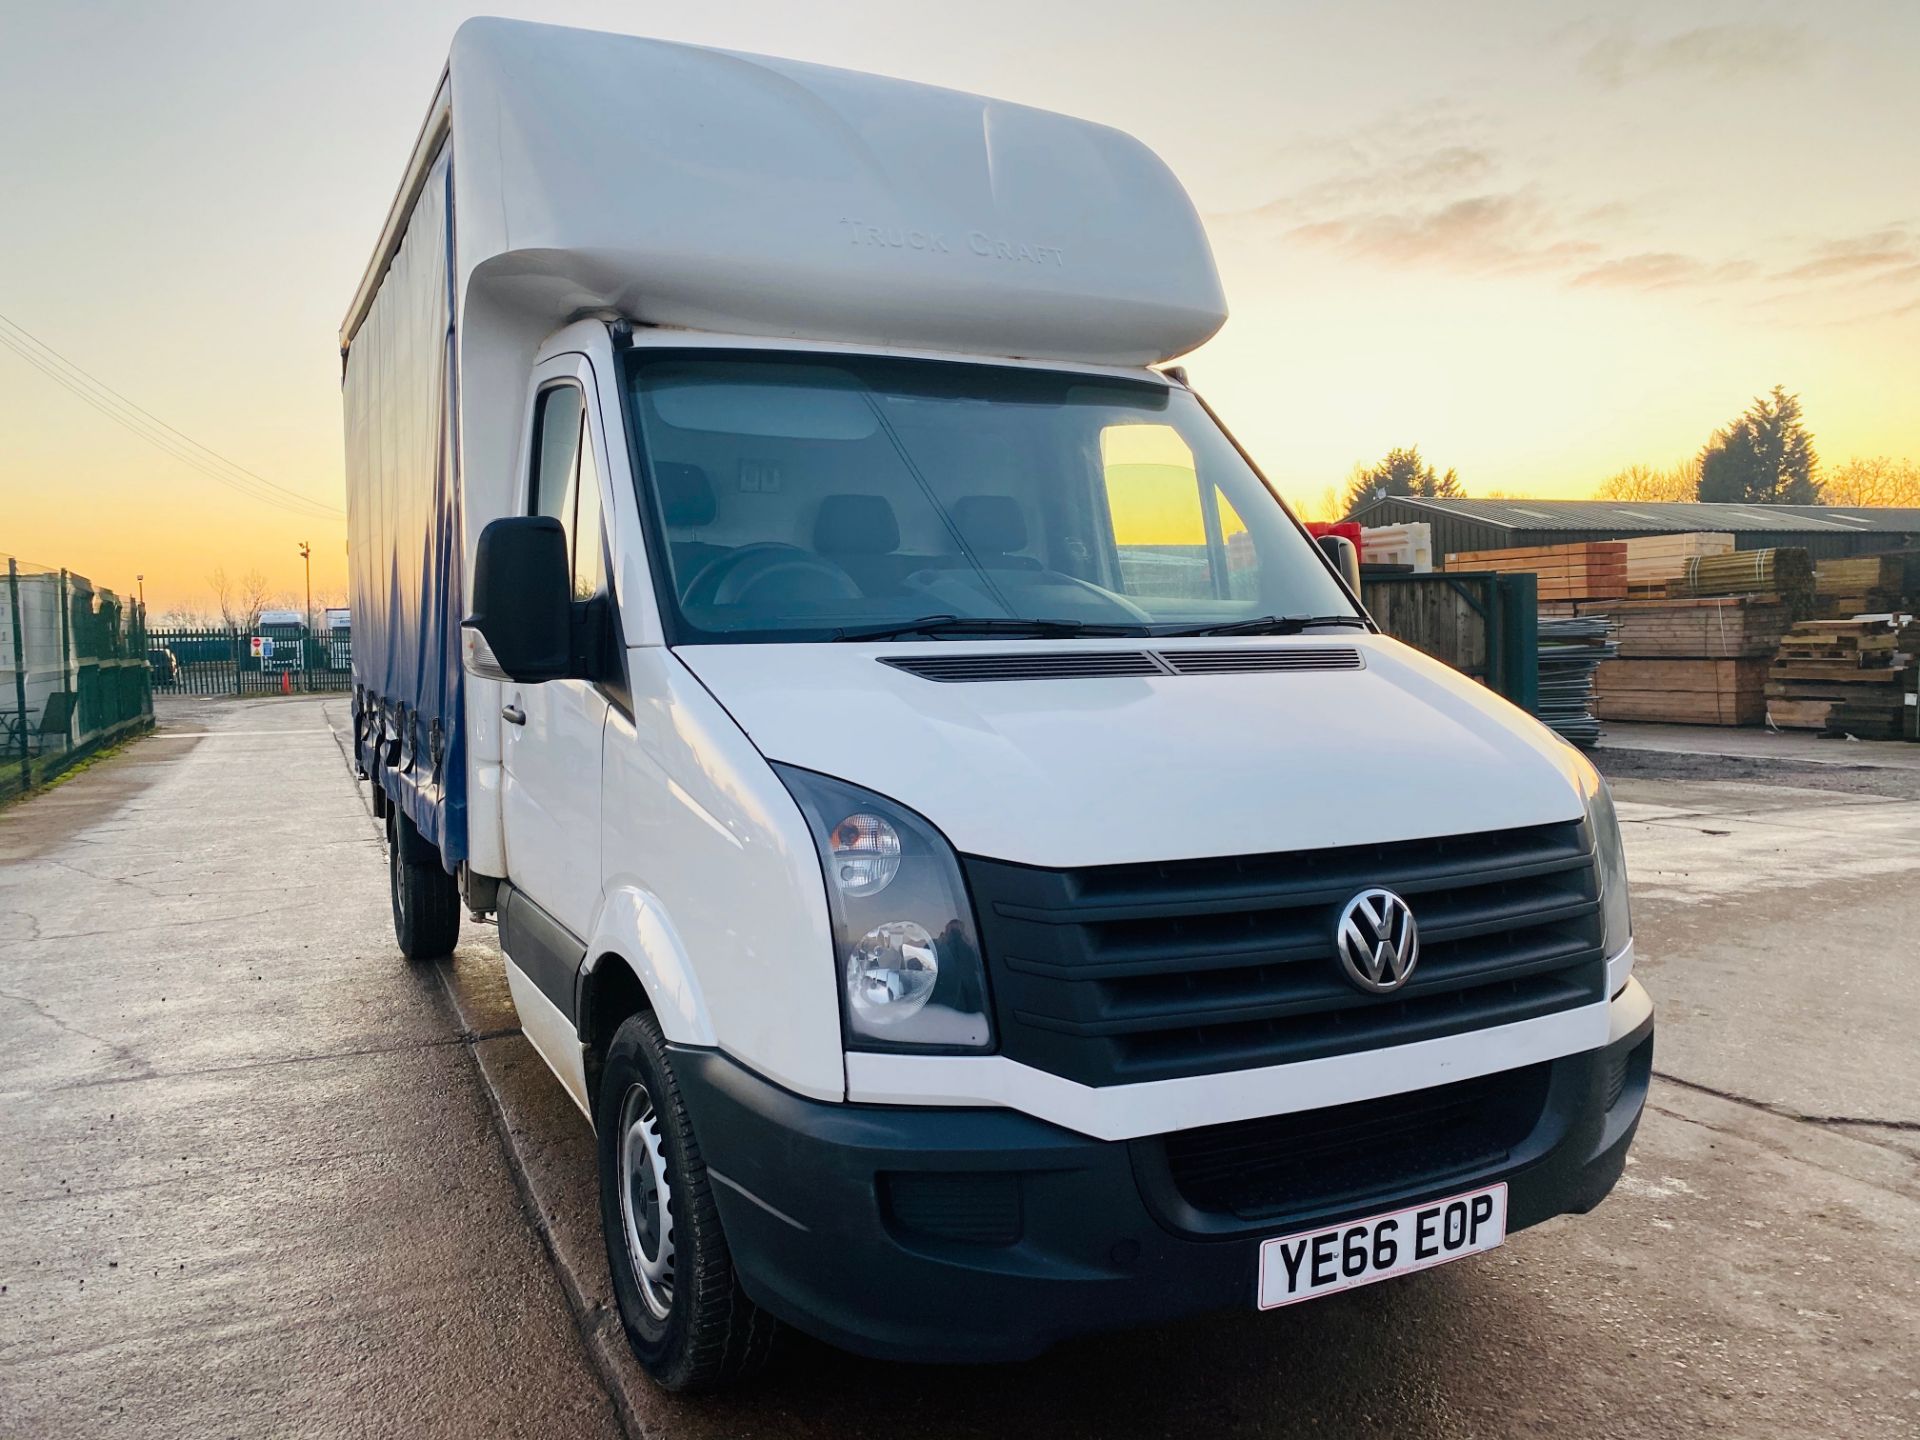 ON SALE VOLKSWAGEN CRAFTER CR35 2.0TDI "LWB" CURTAINSIDE TRUCK - 2017 MODEL - EURO 6 -1 OWNER - LOOK - Image 3 of 20